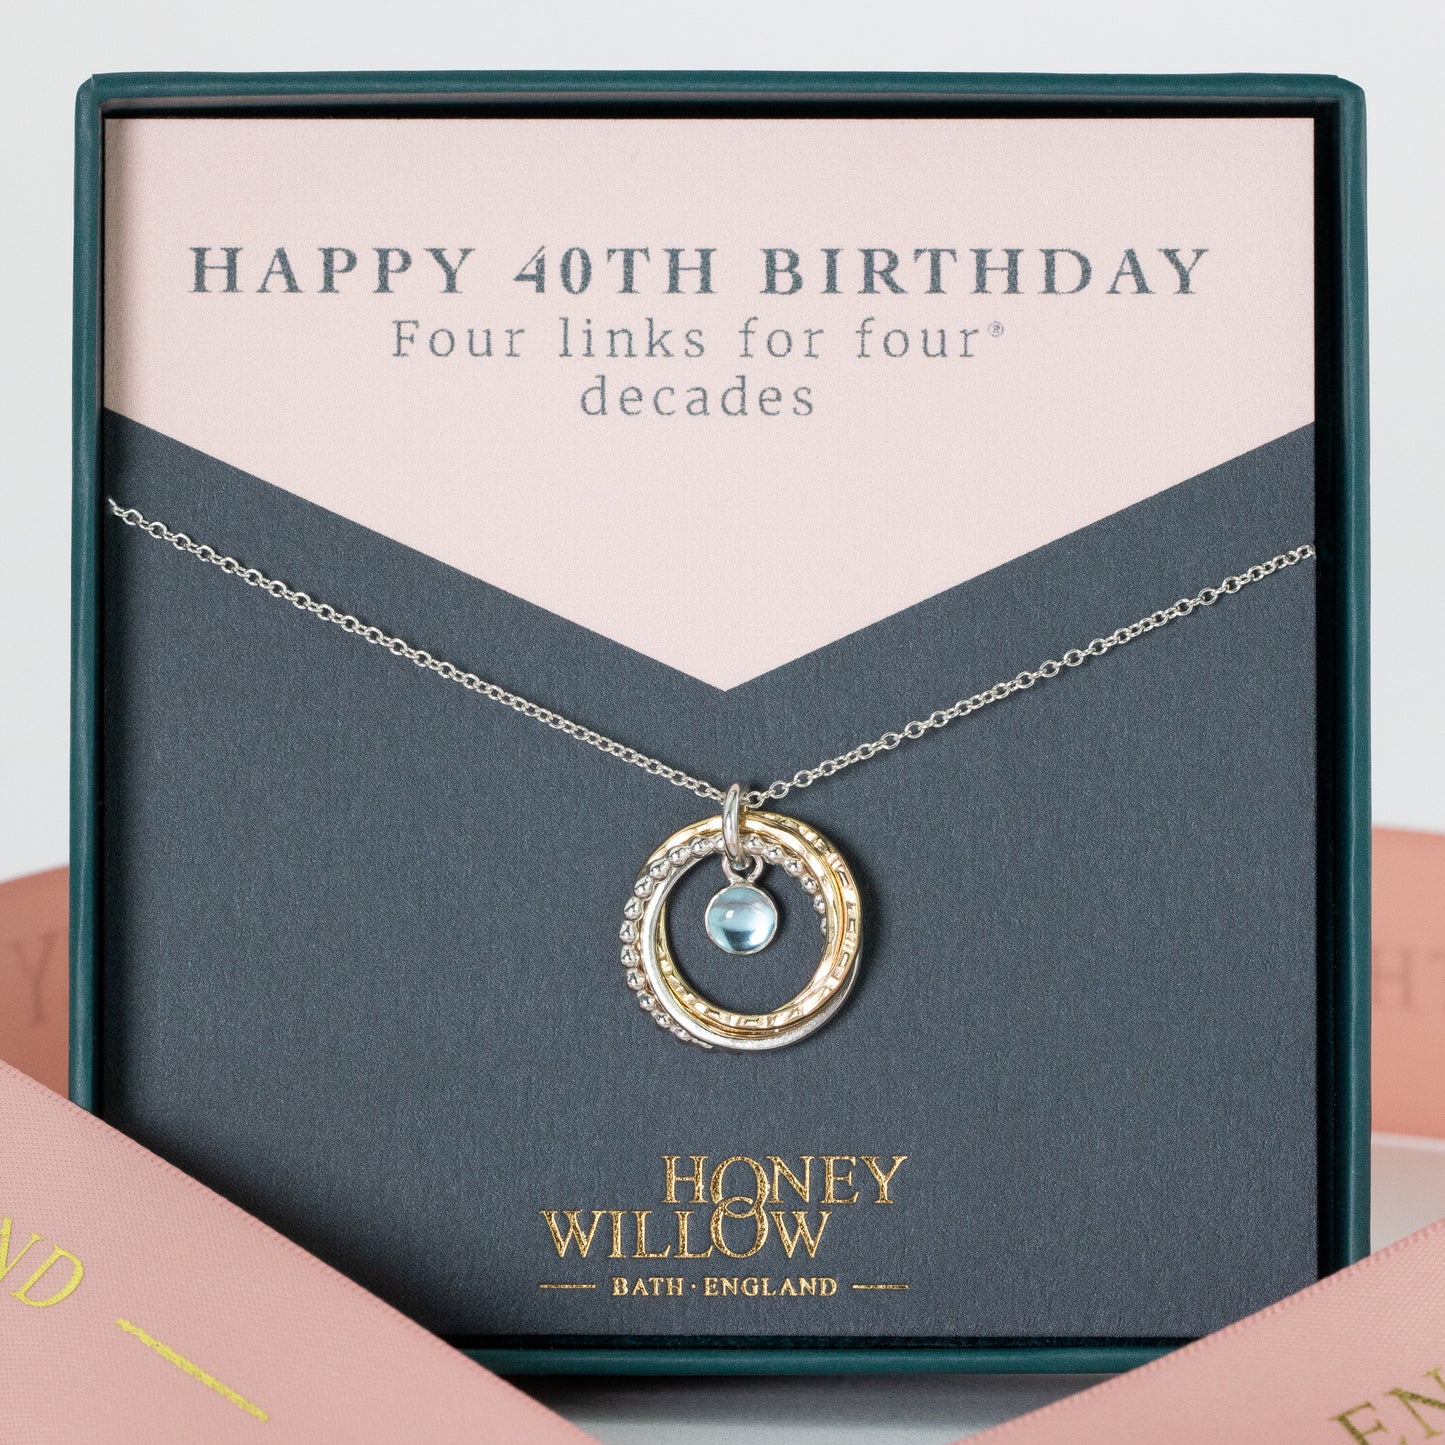 40th Birthday Birthstone Necklace - The Original 4 Links for 4 Decades Necklace - Petite Silver & Gold